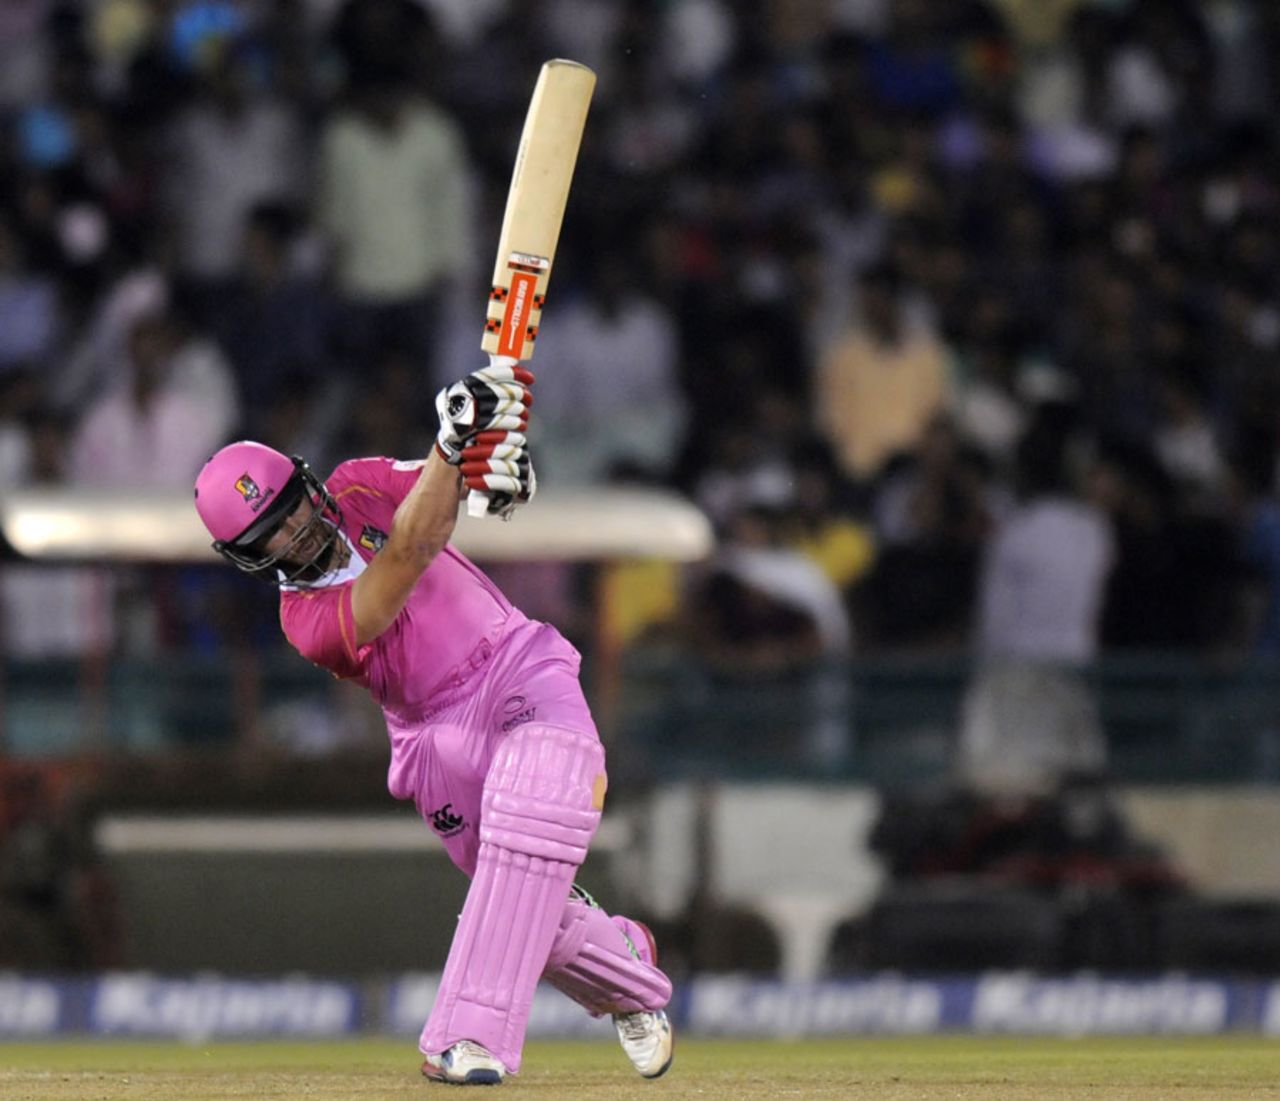 Kane Williamson's 29-ball 52 guided Northern Knights home, Northern Knights v Southern Express, CLT20 qualifier, Raipur, September 13, 2014